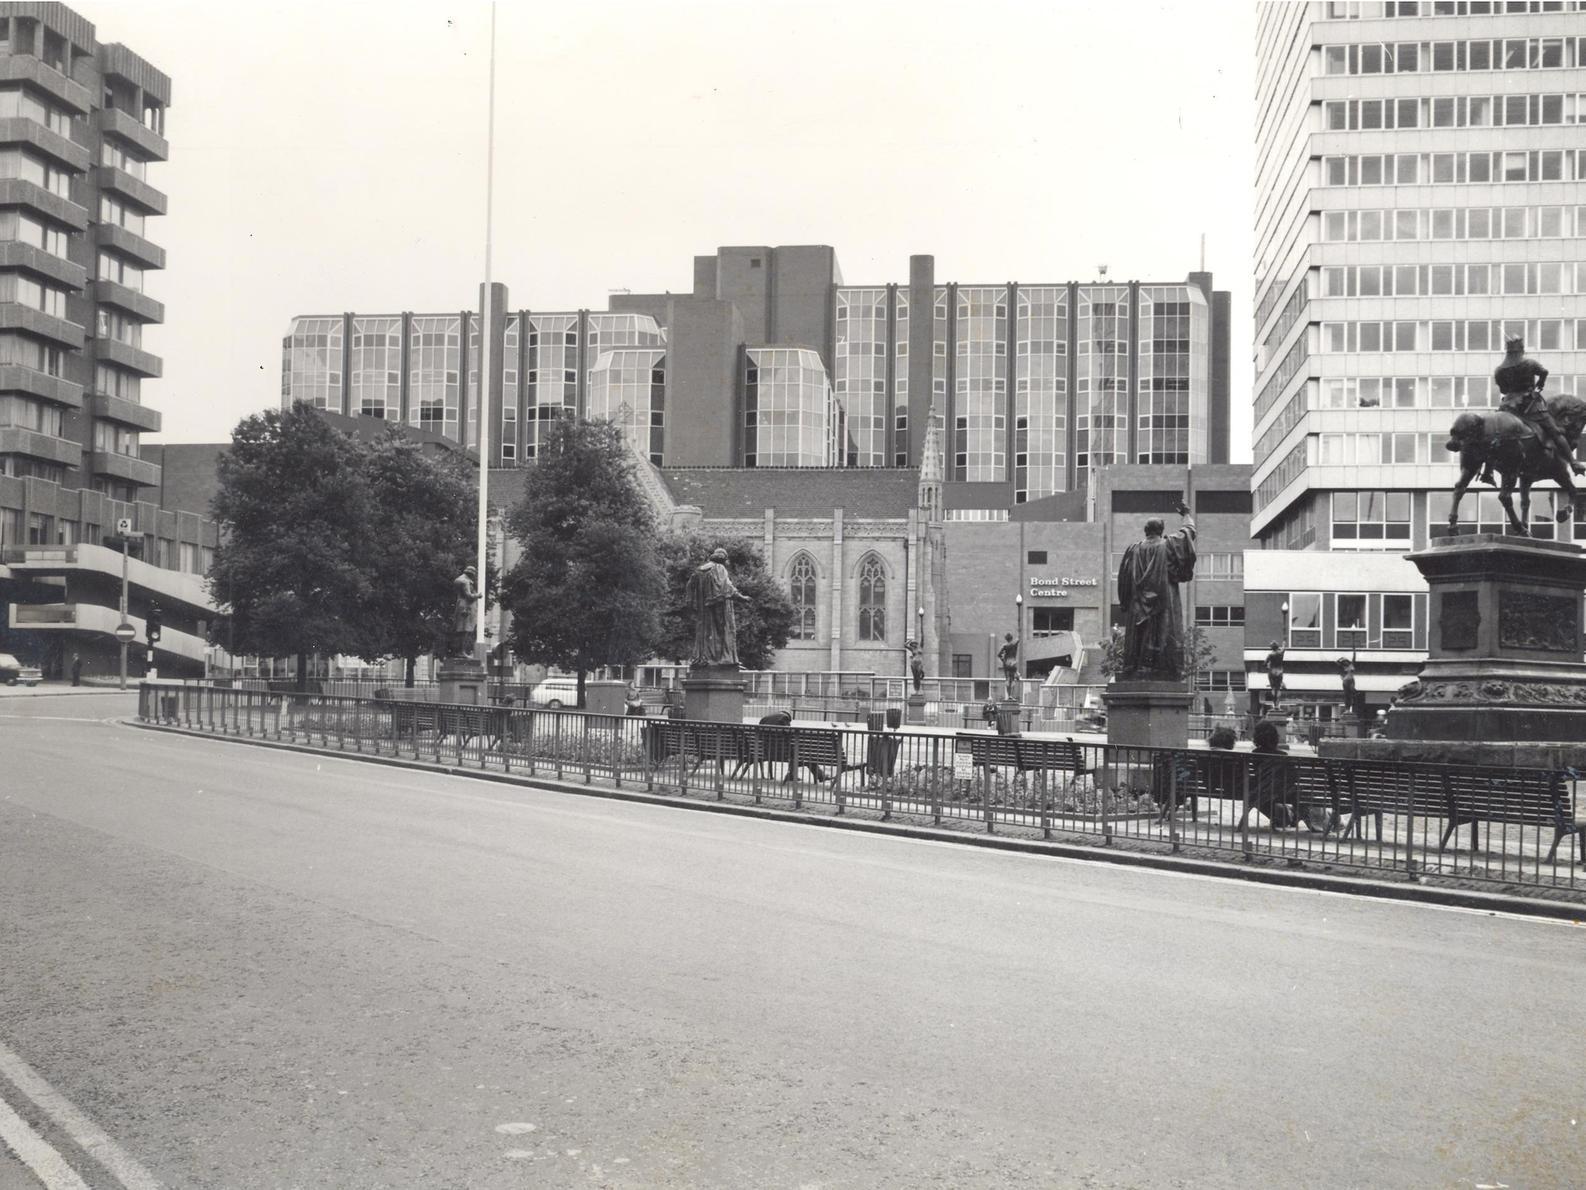 City Square - the hub of Leeds city centre at the end of the 1970s.